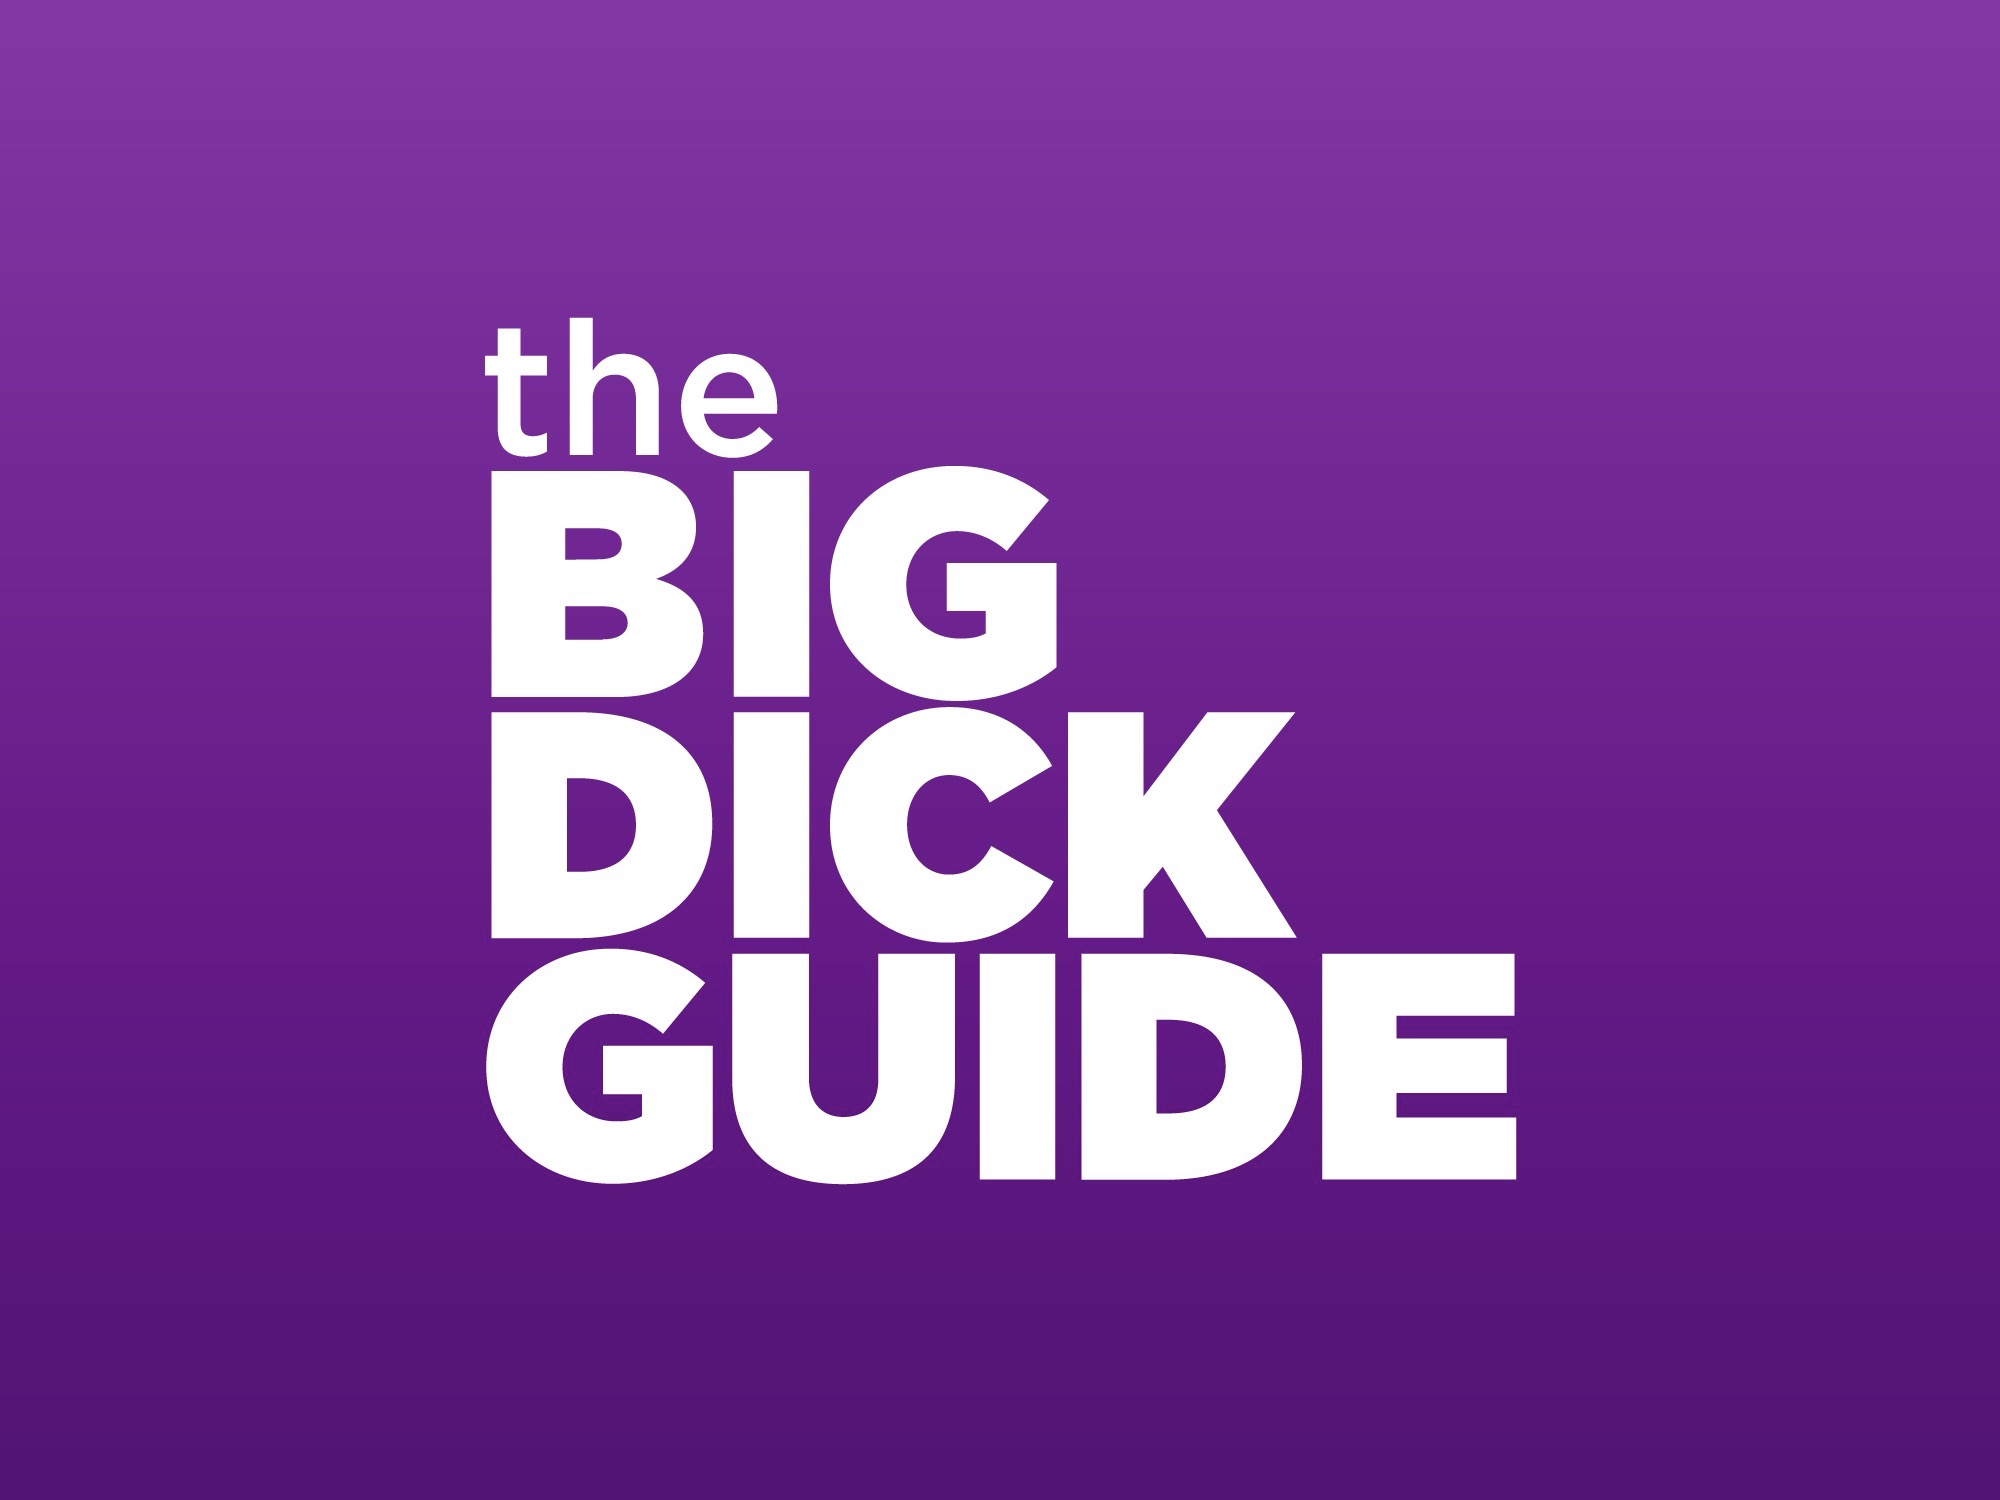 The big dick guide